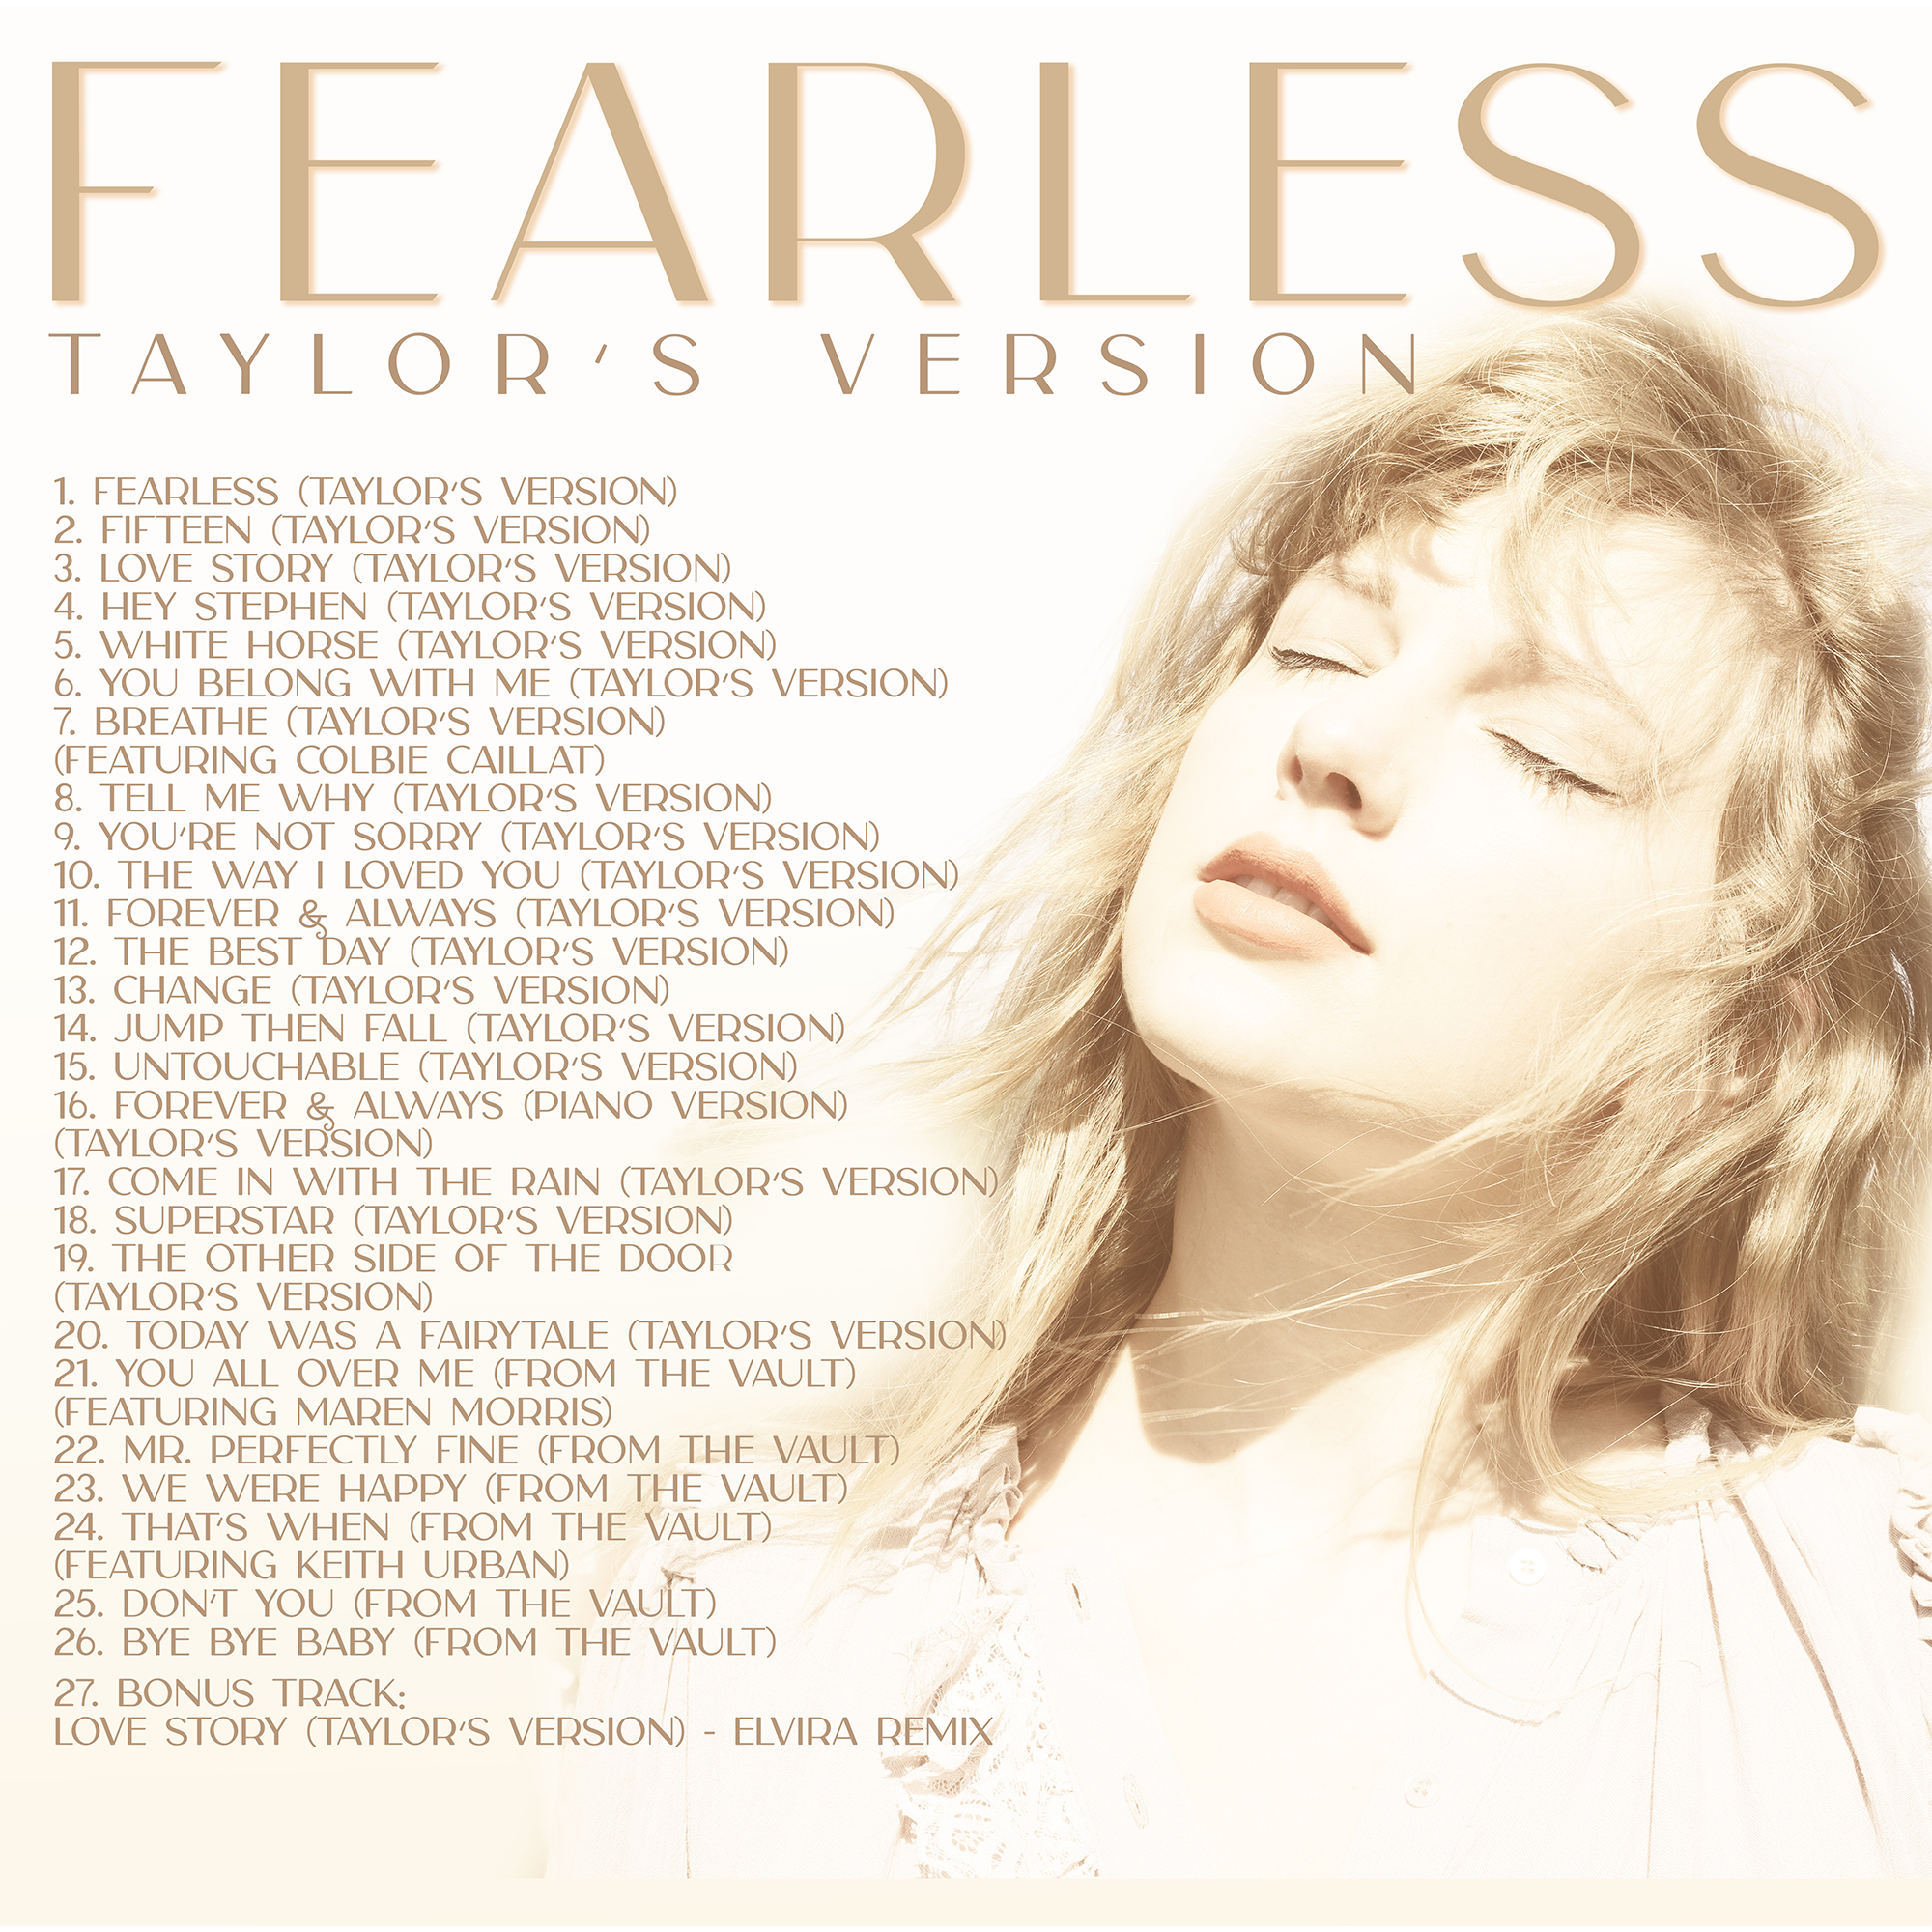 Fearless (Taylor's Version) vinyl back cover